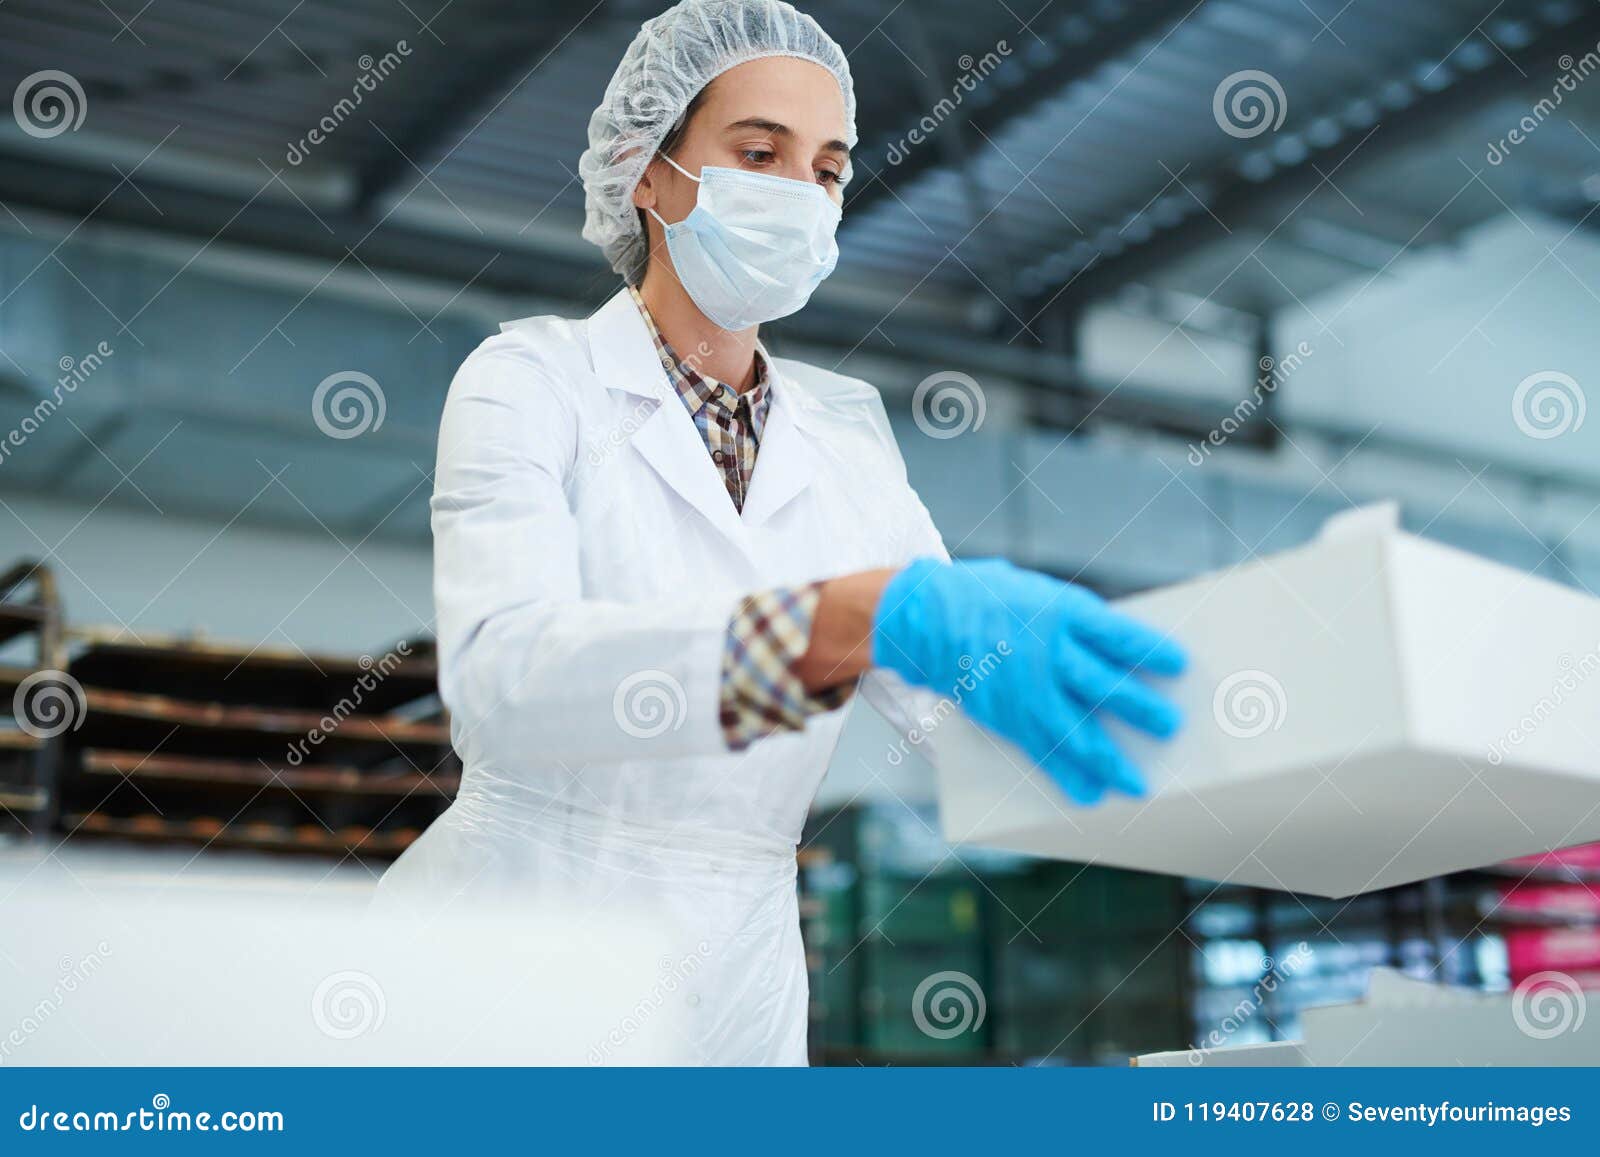 confectionery factory worker holding paper box